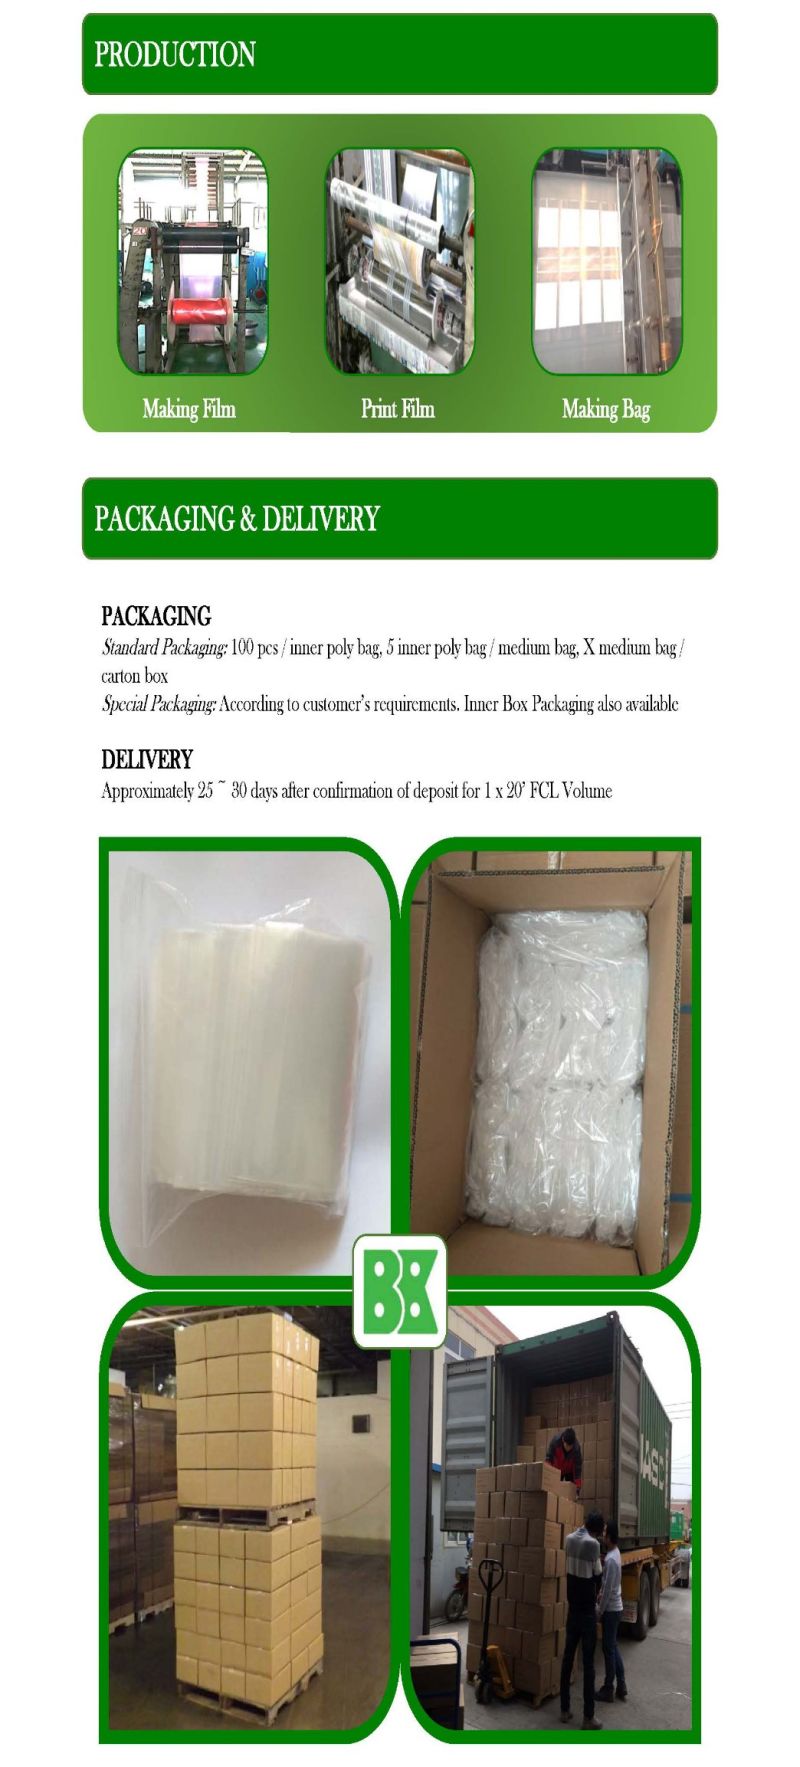 China Supplier Moisture Proof Feature LDPE Plastic Resealable LDPE Slider Zipper Bag /Writable Plastic Bag with Zipper